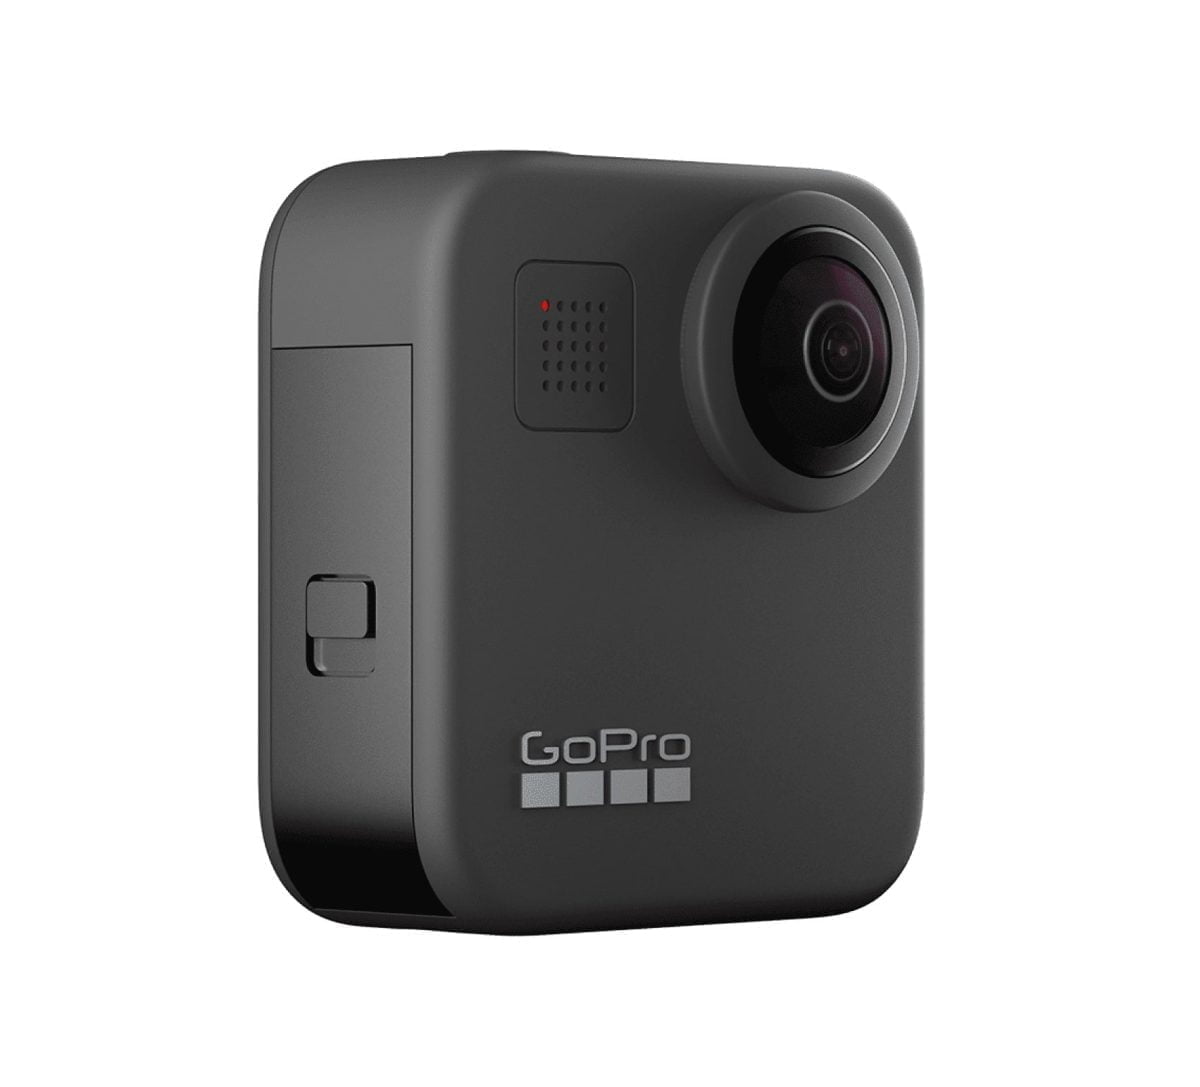 Pdp Max Gallery Angle2 1920 Gopro &Lt;H1&Gt;Gopro Max - Waterproof 360 Digital Action Camera With Unbreakable Stabilization, Touch Screen And Voice Control - Live Hd Streaming&Lt;/H1&Gt; &Lt;Div Class=&Quot;Descriptionmodule_Bundles-Container__Skafo Col-Xlarge-6 Col-Large-6 Col-Medium-4 Col-Small-4 Col-Xsmall-8&Quot;&Gt; &Lt;Div Class=&Quot;Descriptionmodule_Detailslist__321Ps&Quot;&Gt; &Lt;P Class=&Quot;Header Header-5&Quot;&Gt;Product Details&Lt;/P&Gt; &Lt;Div Class=&Quot;Row Descriptionmodule_Bundles__3Ah0V Descriptionmodule_Detailitem__1Q3Hp&Quot;&Gt; &Lt;Ul&Gt; &Lt;Li Class=&Quot;Paragraph Paragraph-Small&Quot;&Gt;Shoot Hero Mode Or Go With 360 Mode For Stunning 6K.⁵&Lt;/Li&Gt; &Lt;Li Class=&Quot;Paragraph Paragraph-Small&Quot;&Gt;Unbreakable Stabilization From Max Hypersmooth&Lt;/Li&Gt; &Lt;Li Class=&Quot;Paragraph Paragraph-Small&Quot;&Gt;Waterproof To 16Ft + Built Tough&Lt;/Li&Gt; &Lt;Li Class=&Quot;Paragraph Paragraph-Small&Quot;&Gt;Premium 360 + Stereo Audio From 6 Mics&Lt;/Li&Gt; &Lt;Li Class=&Quot;Paragraph Paragraph-Small&Quot;&Gt;Vlog To The Max With 1080P Live Streaming&Lt;/Li&Gt; &Lt;Li Class=&Quot;Paragraph Paragraph-Small&Quot;&Gt;Max Timewarp, Powerpano, 4 Digital Lenses + So Many Other Features To Nail Any Shot&Lt;/Li&Gt; &Lt;Li Class=&Quot;Paragraph Paragraph-Small&Quot;&Gt;Compatible With Quik App&Lt;/Li&Gt; &Lt;Li Class=&Quot;Paragraph Paragraph-Small&Quot;&Gt;Compatible With Over 30 Mounts + Accessories&Lt;/Li&Gt; &Lt;/Ul&Gt; &Lt;/Div&Gt; &Lt;/Div&Gt; &Lt;/Div&Gt; &Nbsp; Gopro Max Gopro Max - Waterproof 360 Digital Action Camera With Unbreakable Stabilization, Touch Screen And Voice Control - Live Hd Streaming